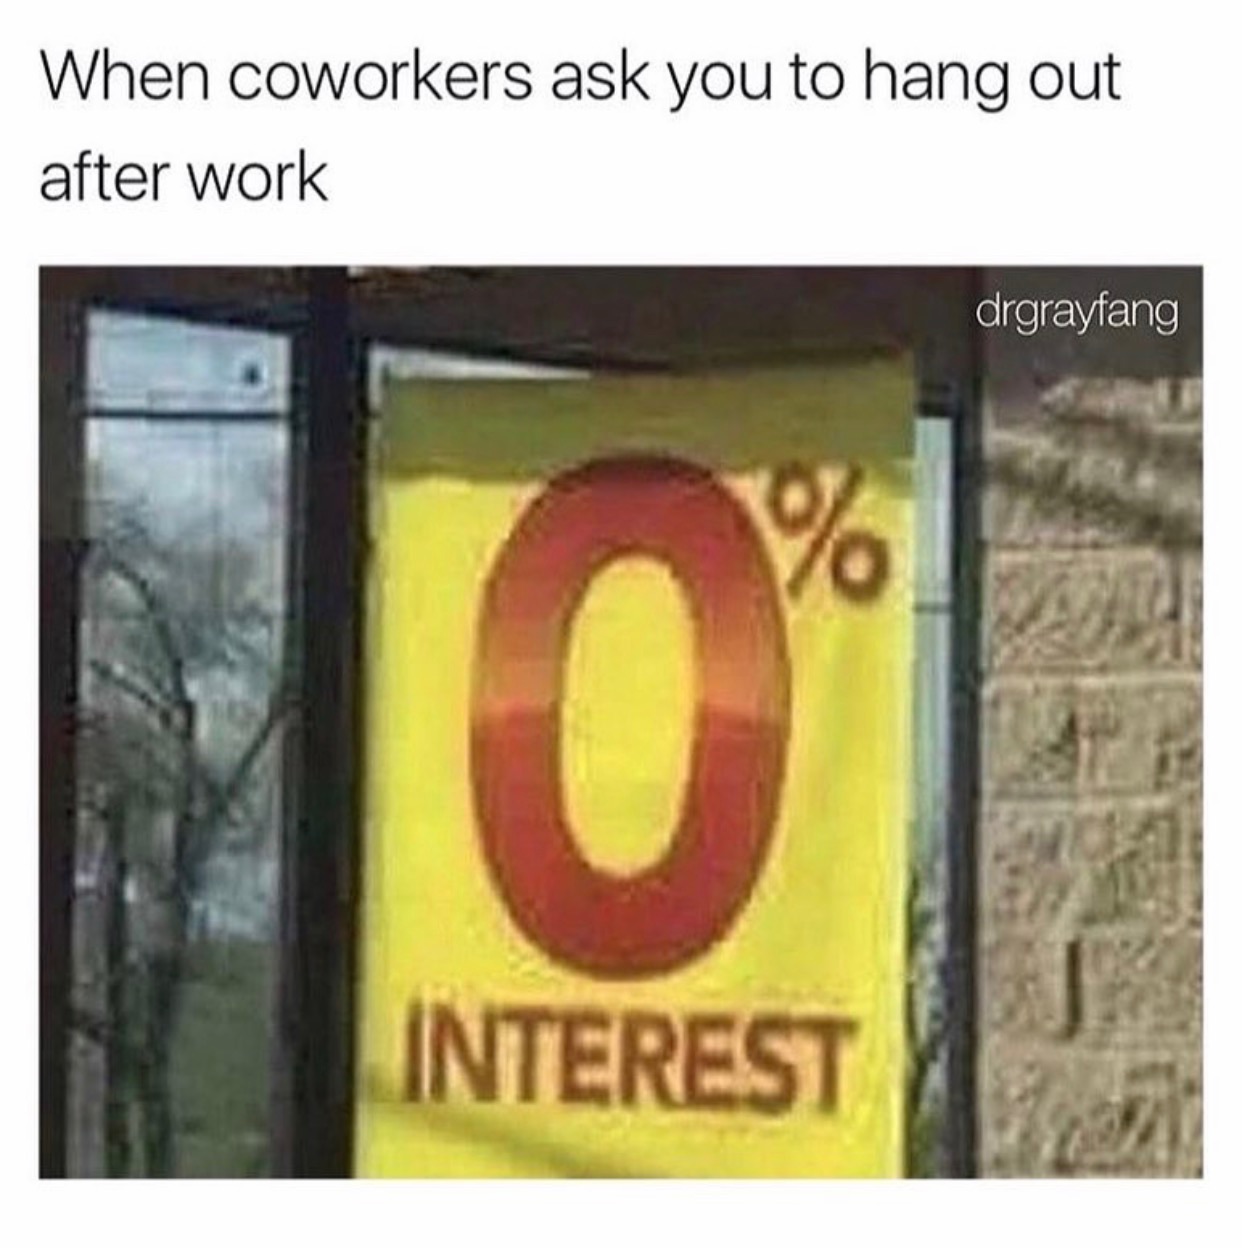 0 interest meme - When coworkers ask you to hang out after work drgrayfang Interest